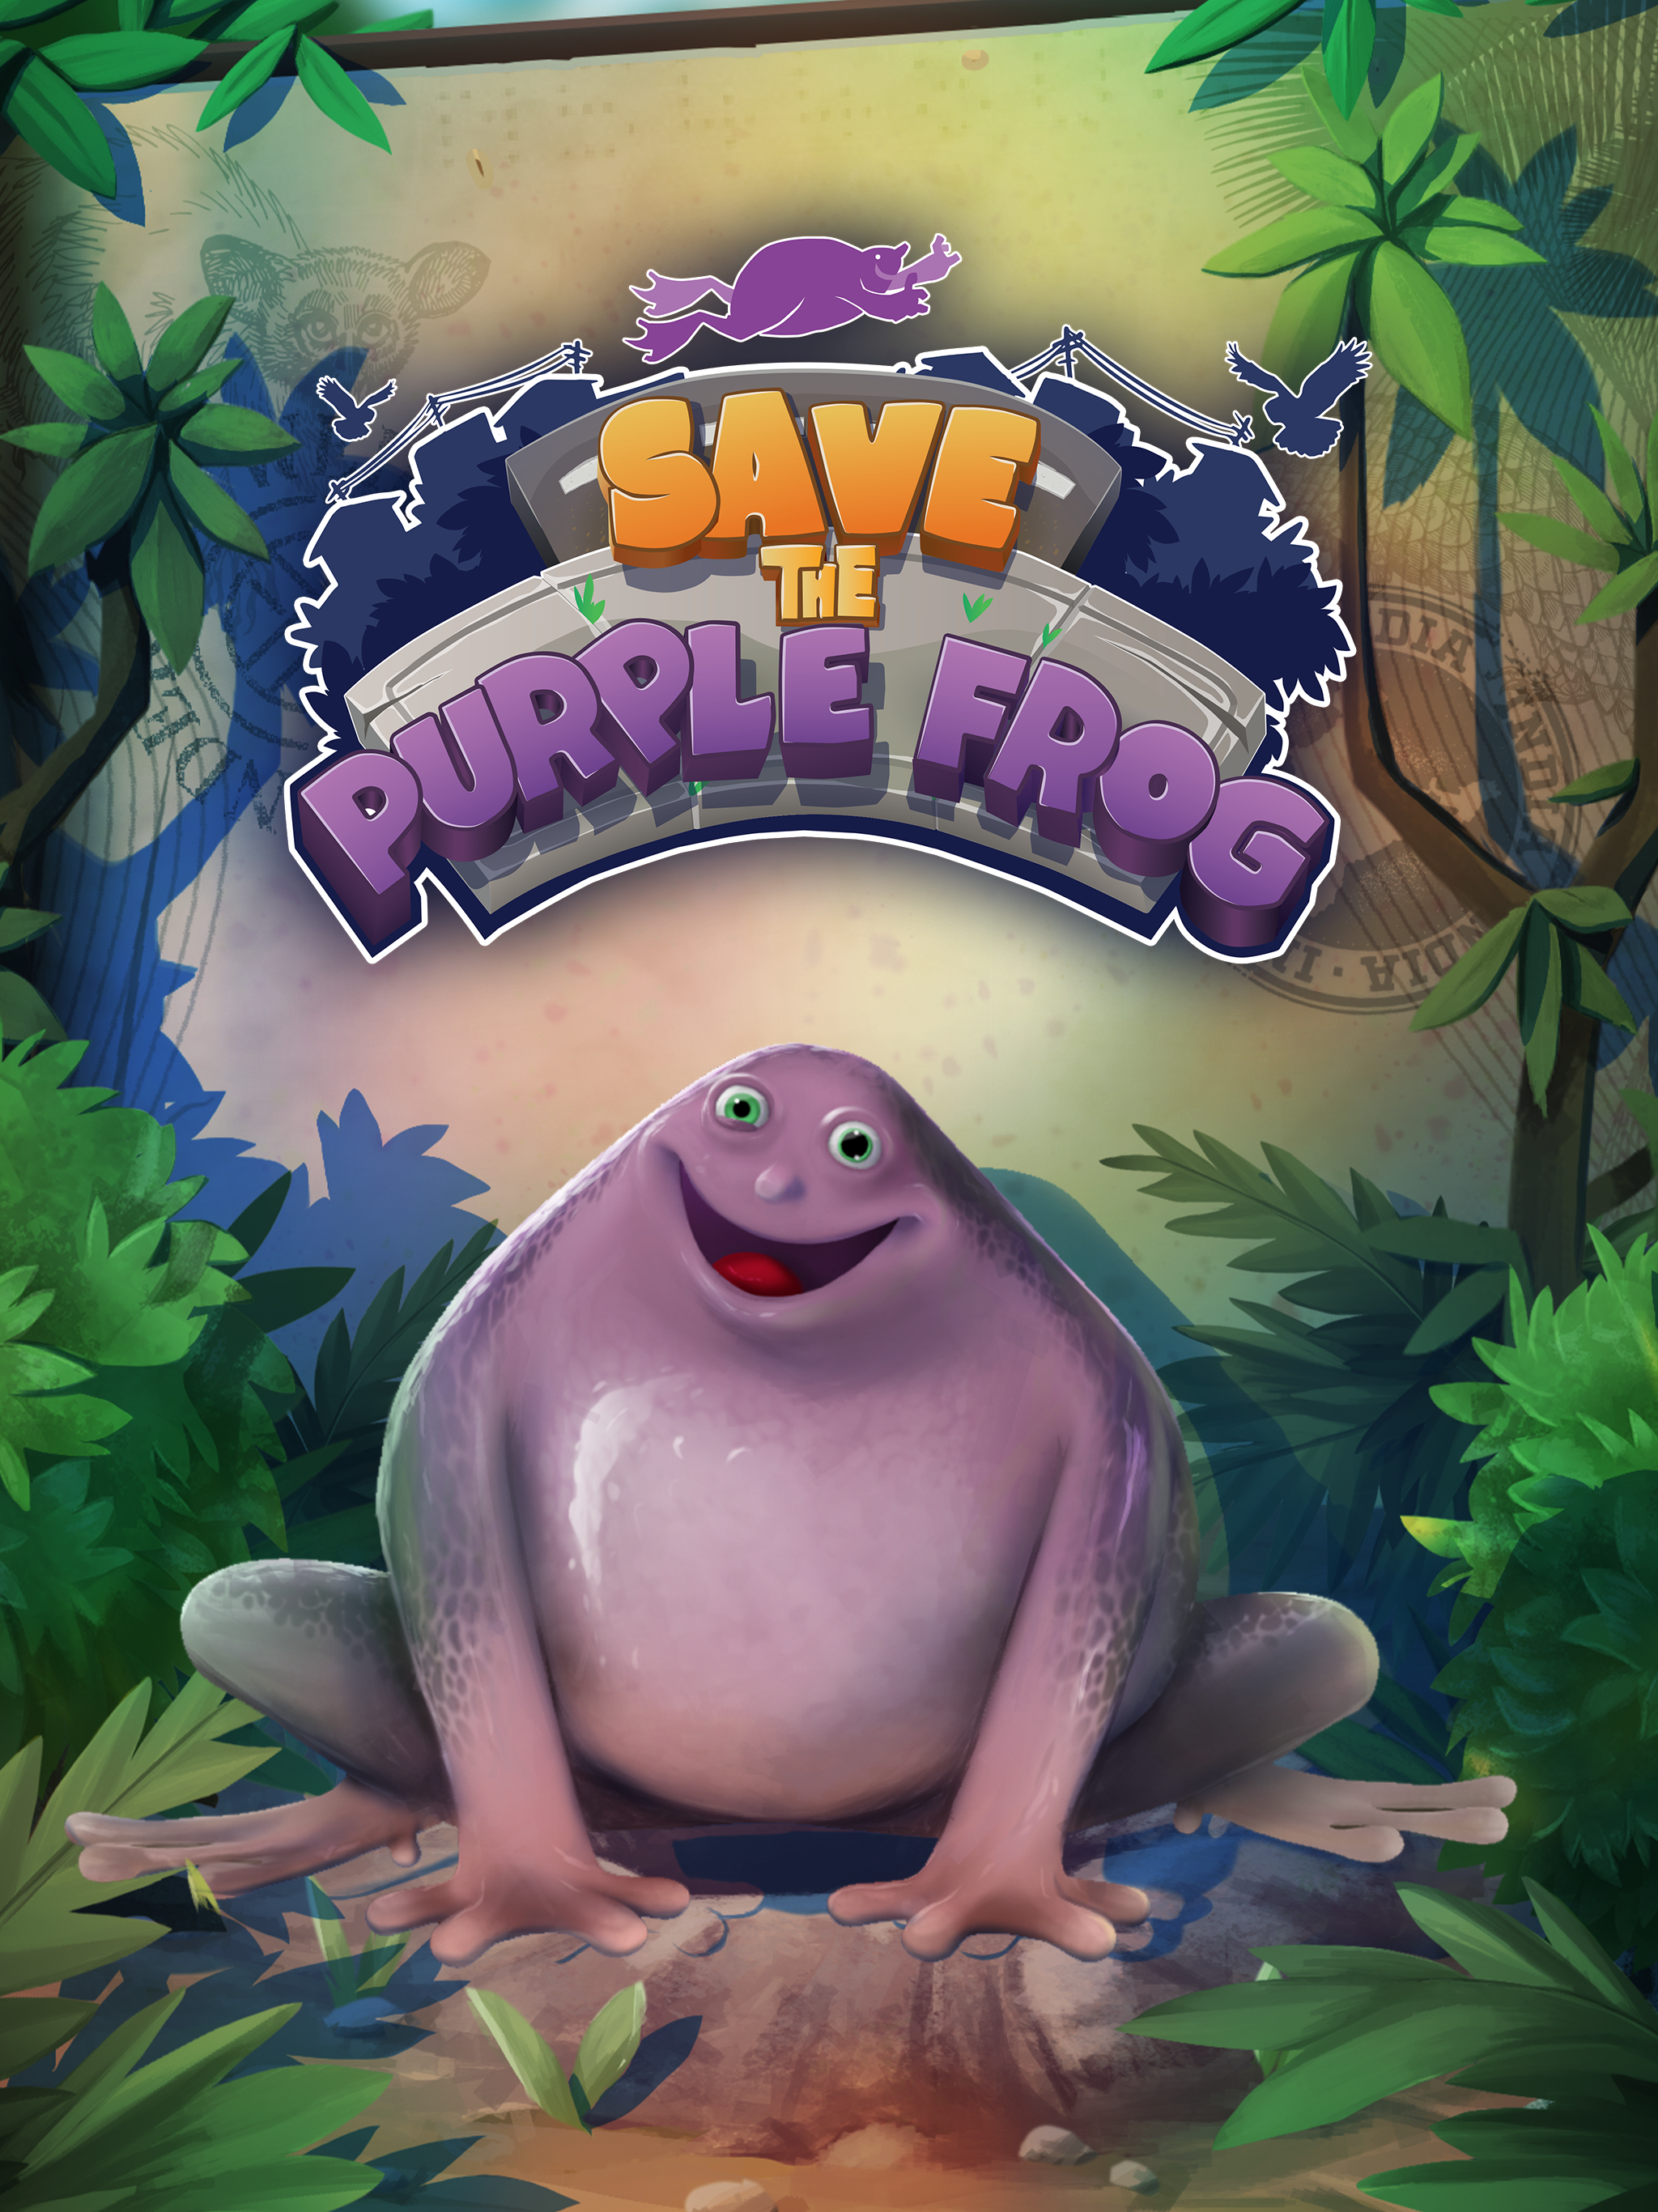 Save The Purple Frog character